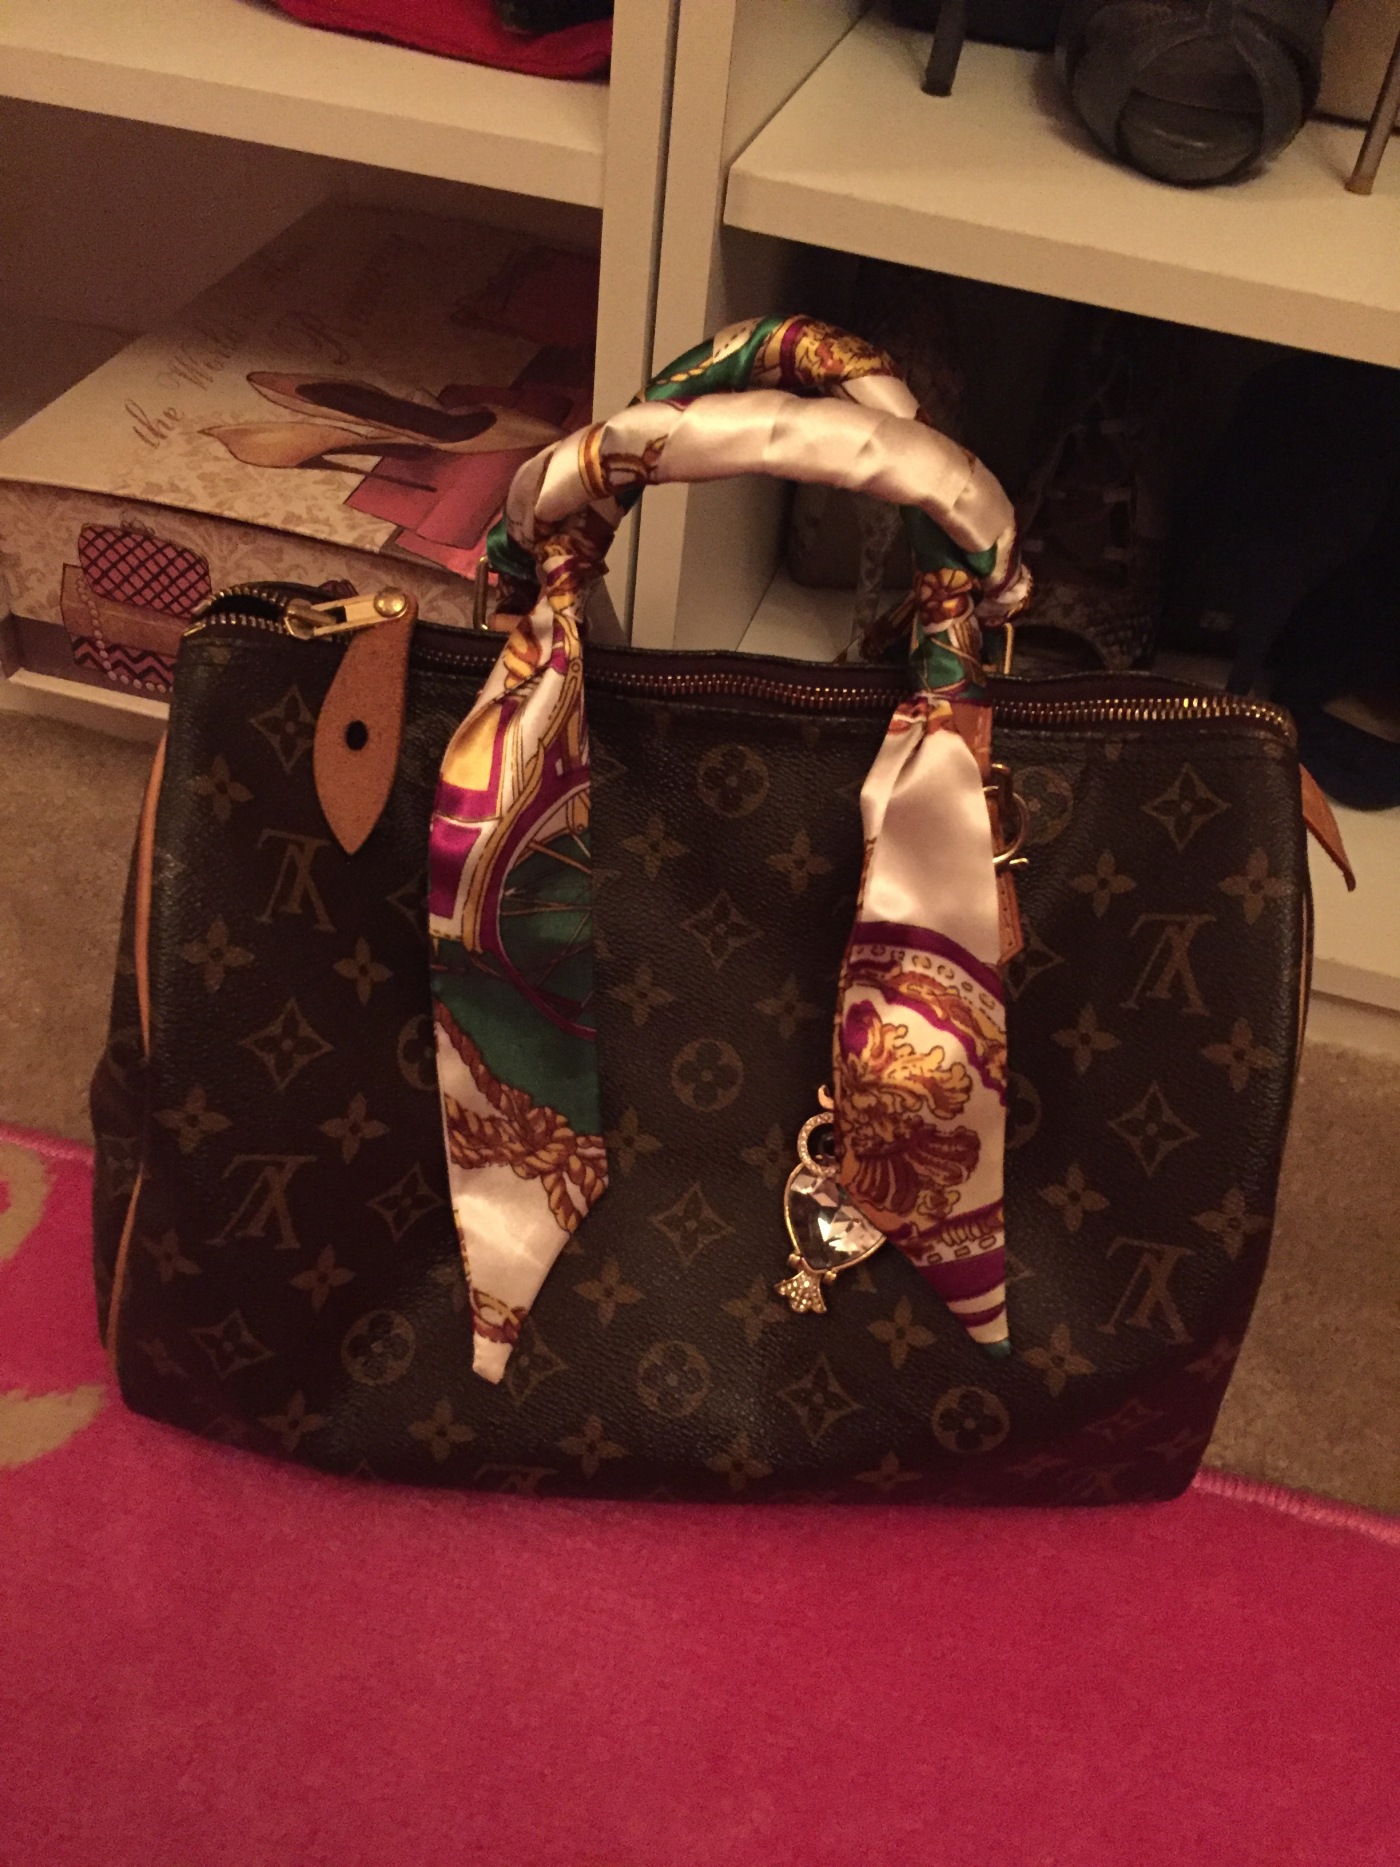 help dating louis vuitton scarf